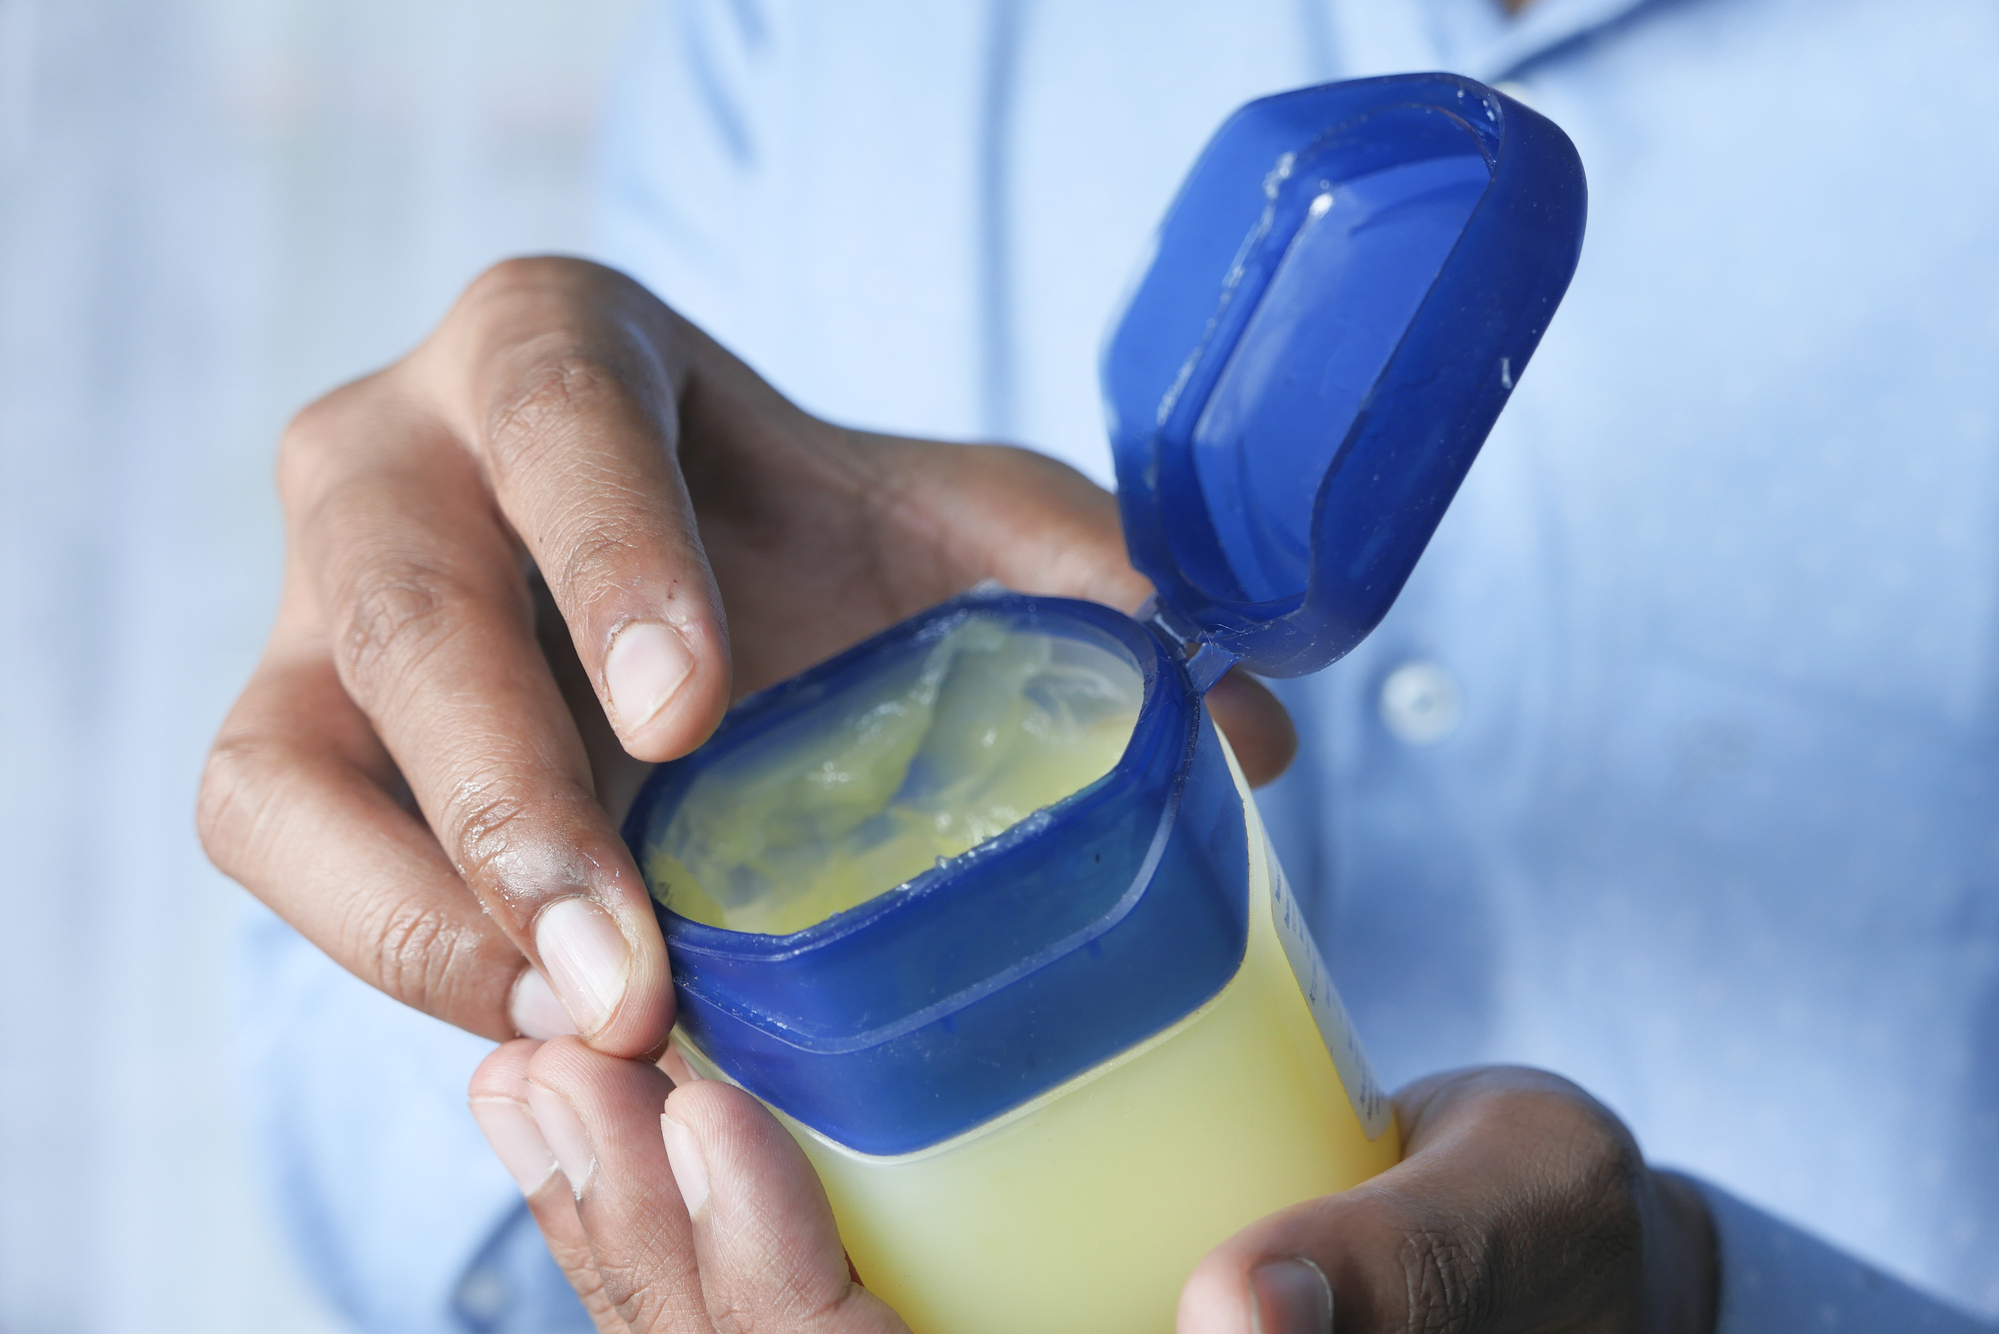 12 Household Problems You Can Fix With Vaseline That Everyone Should Know